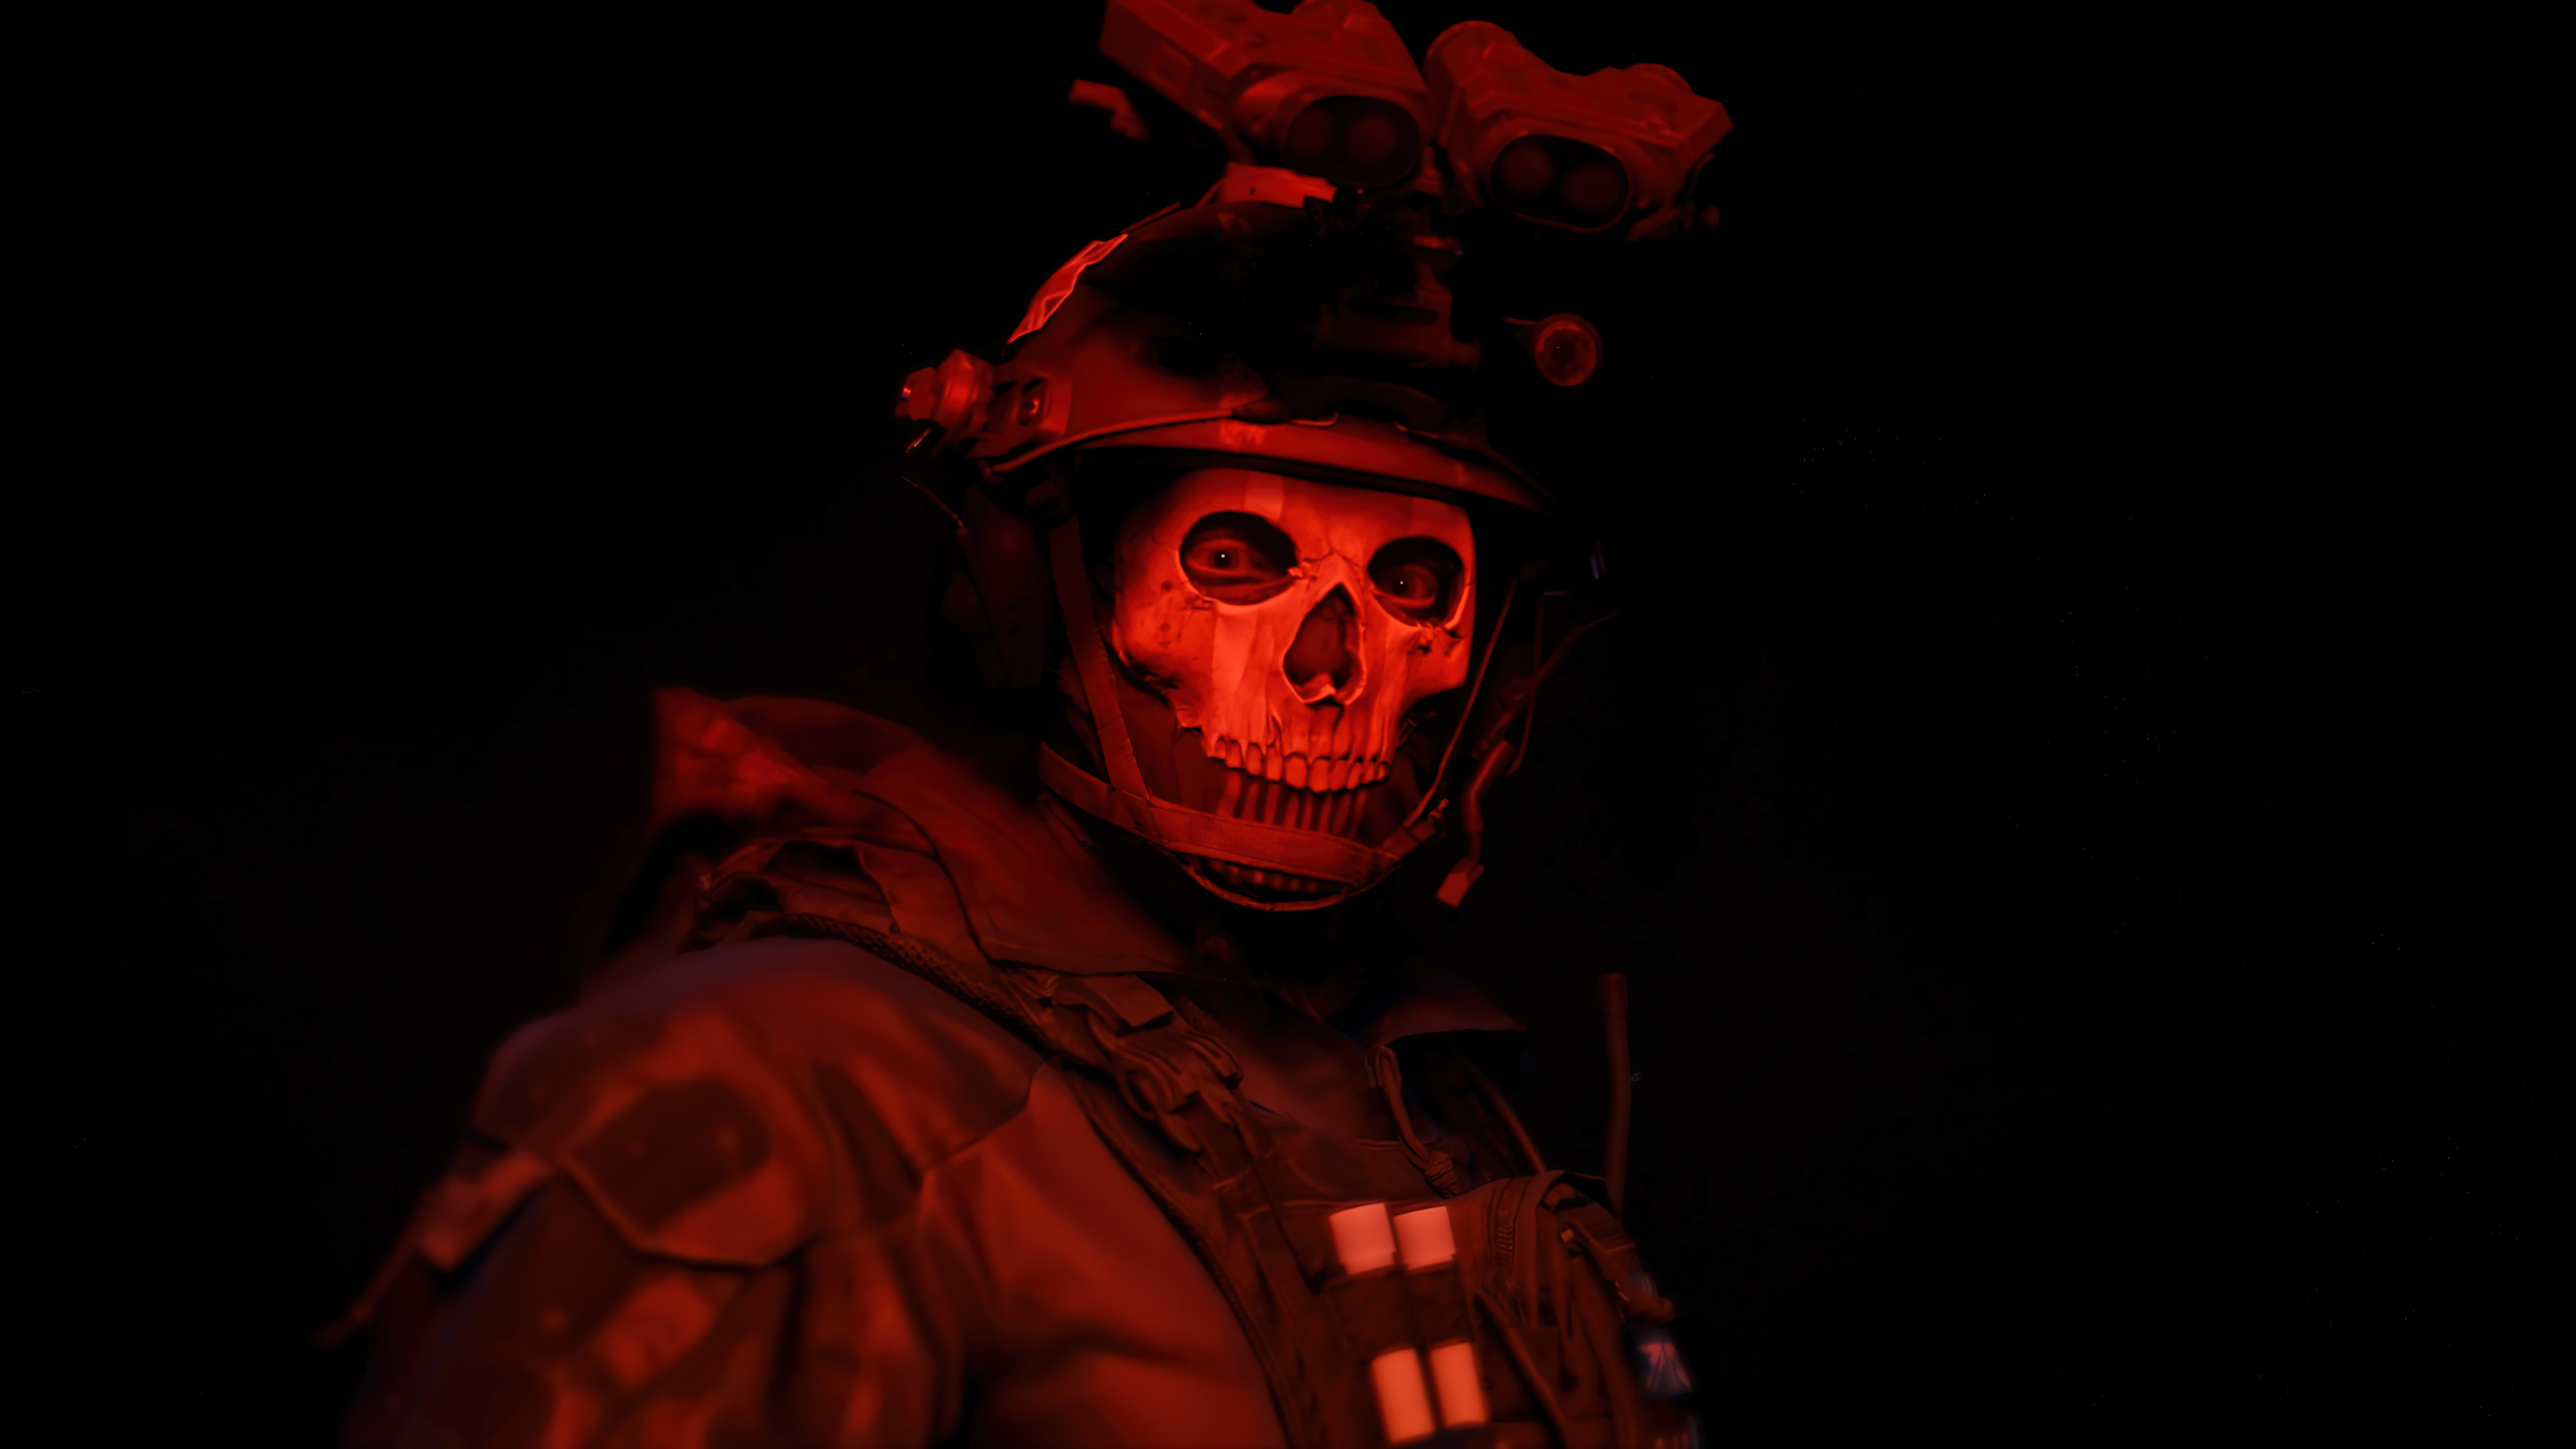 Call Of Duty Modern Warfare Ii Call Of Duty Ghost Call Of Duty Ghosts Soldier Skull Red Light Simple 3840x2160